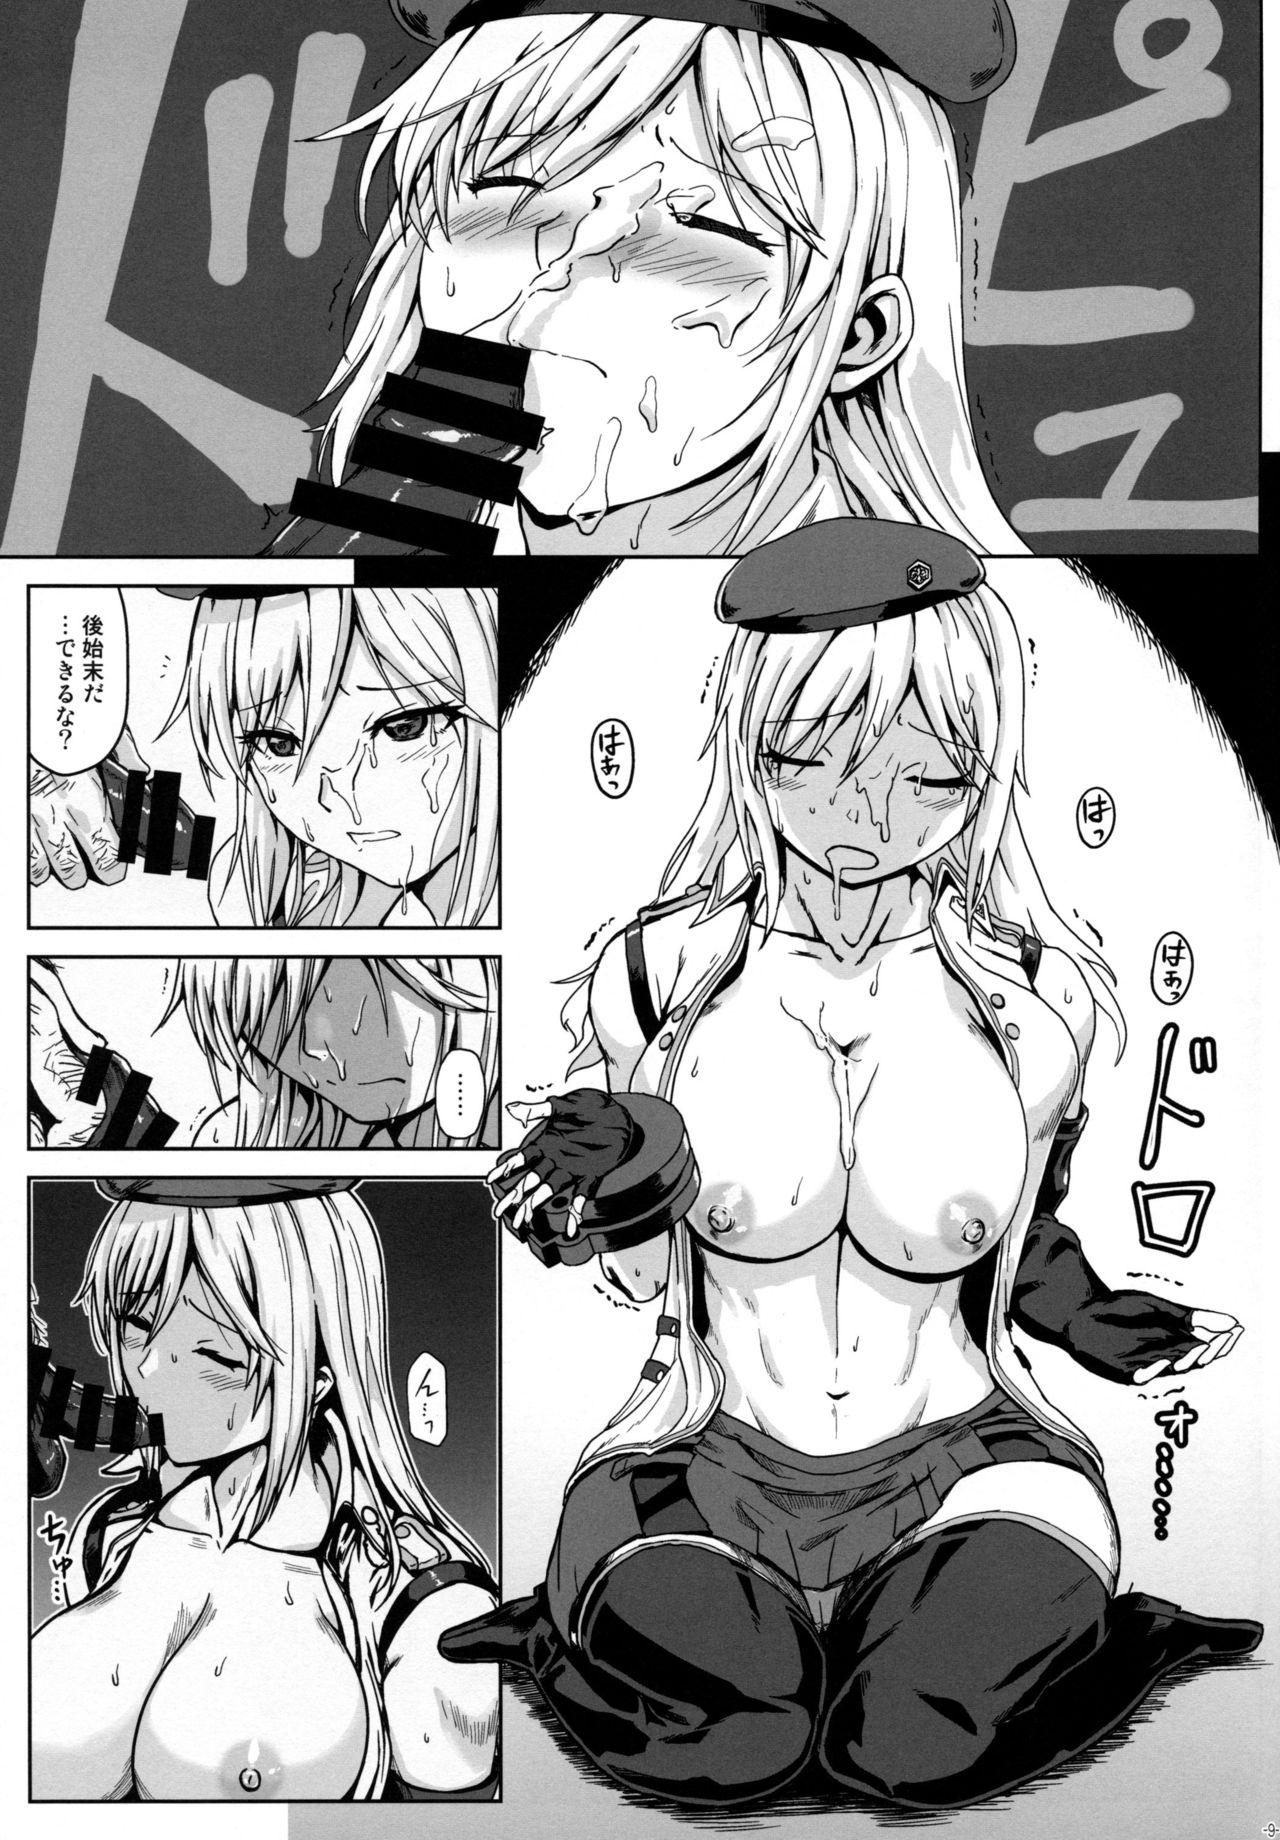 Love (C97) [Lithium (Uchiga)] Again #7 "The Banquet of Madness (Mae)" (God Eater) - God eater Massages - Page 8